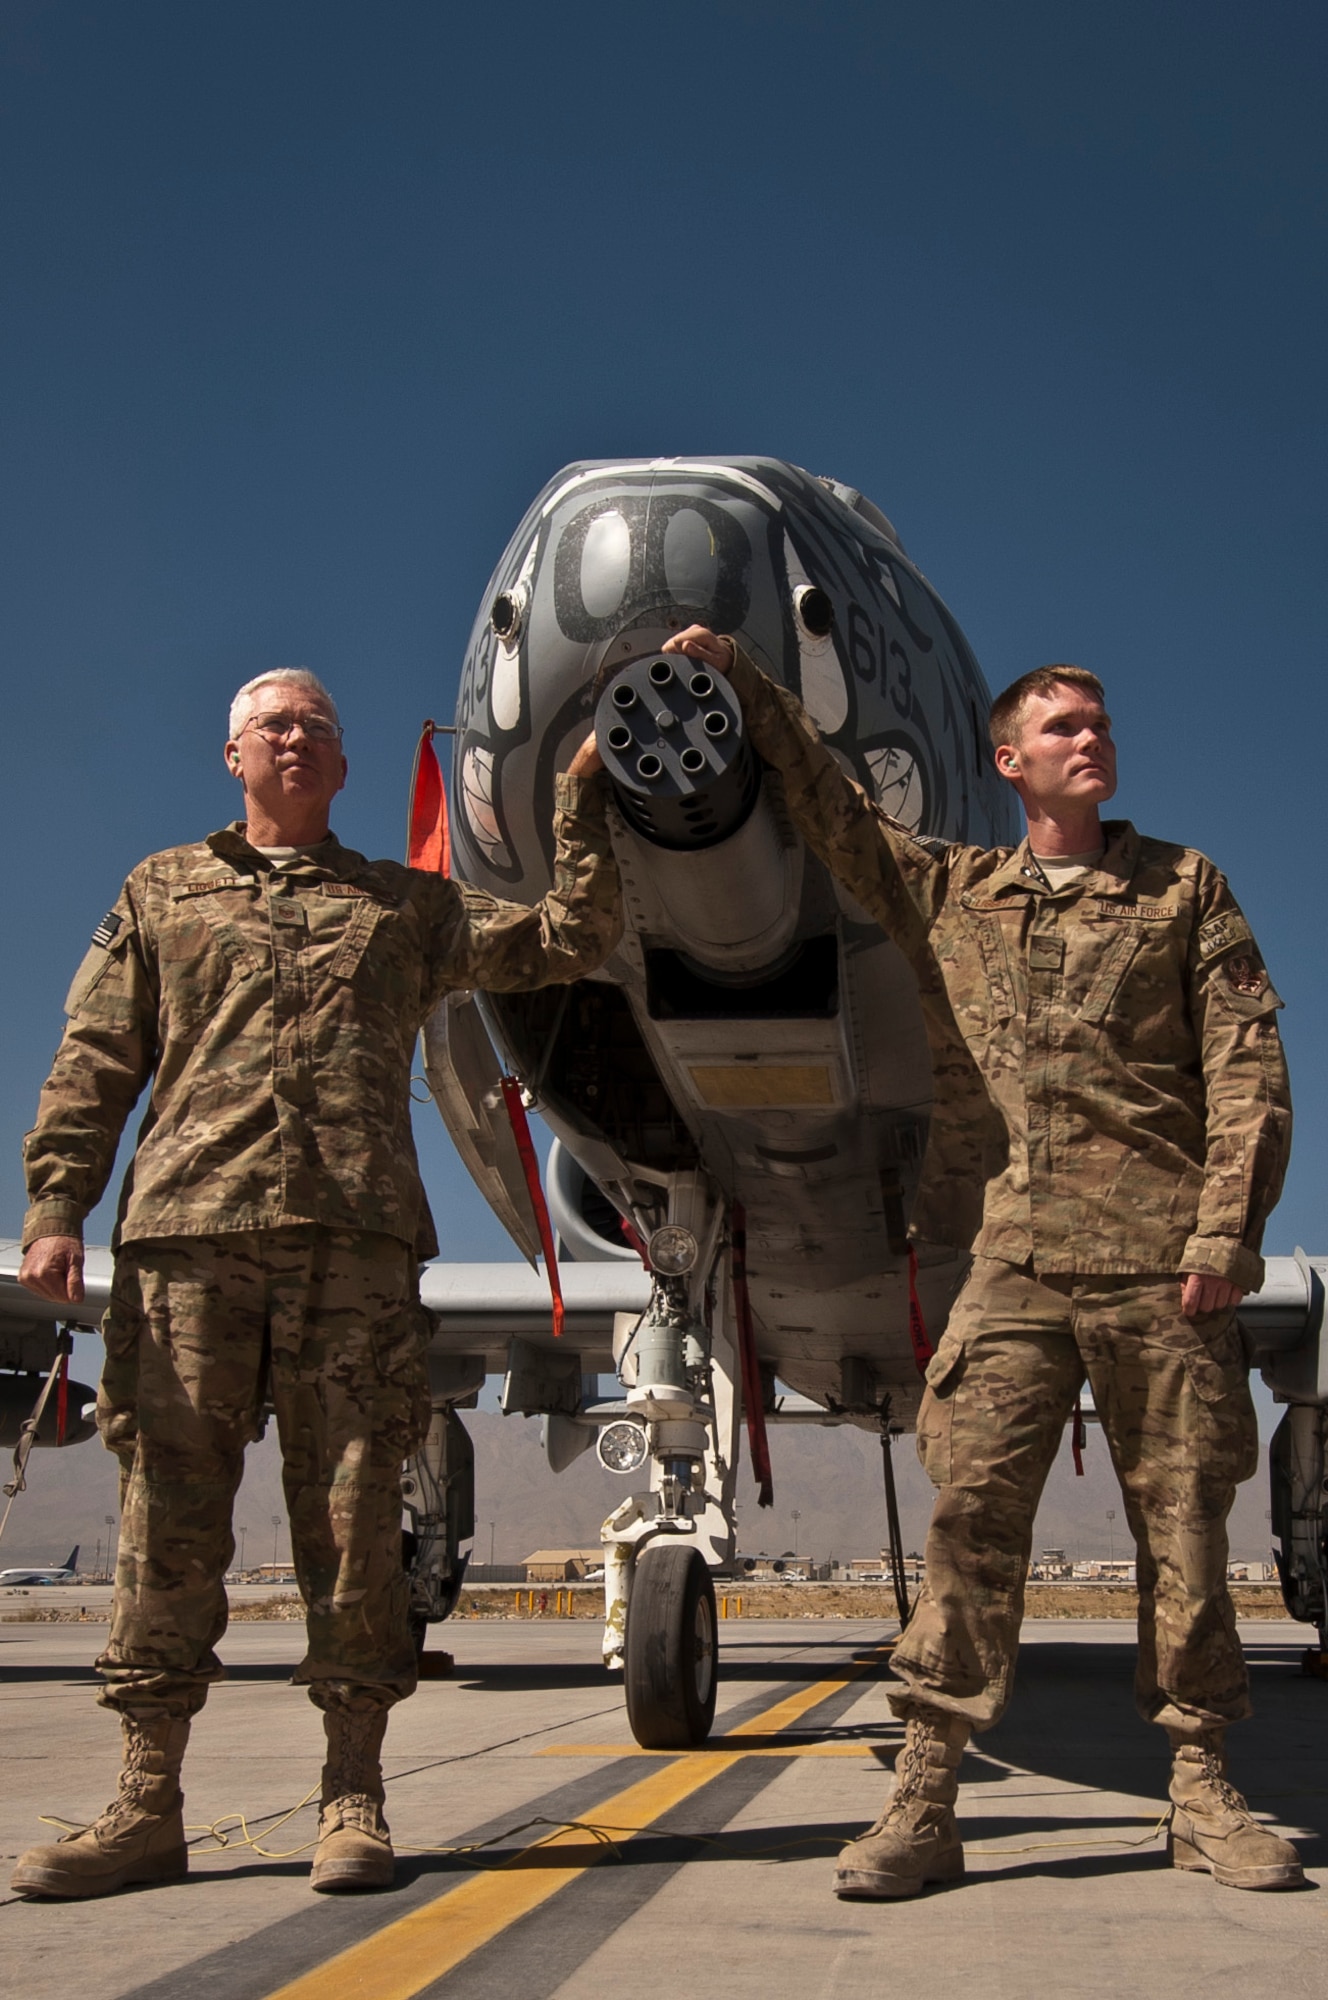 MSgt William Liggett and his son, A1C Sean Liggett, maintainers deployed together to the 455th Expeditionary Aircraft Maintenance Squadron, stand in front of a U.S. Air Force A-10 Thunderbolt II at Bagram Airfield, Afghanistan, Oct. 3, 2012. The father and son team began their journey home this week after successfully completing their deployment with the 455th Air Expeditionary Wing. (U.S. Air Force Photo/Capt. Raymond Geoffroy)